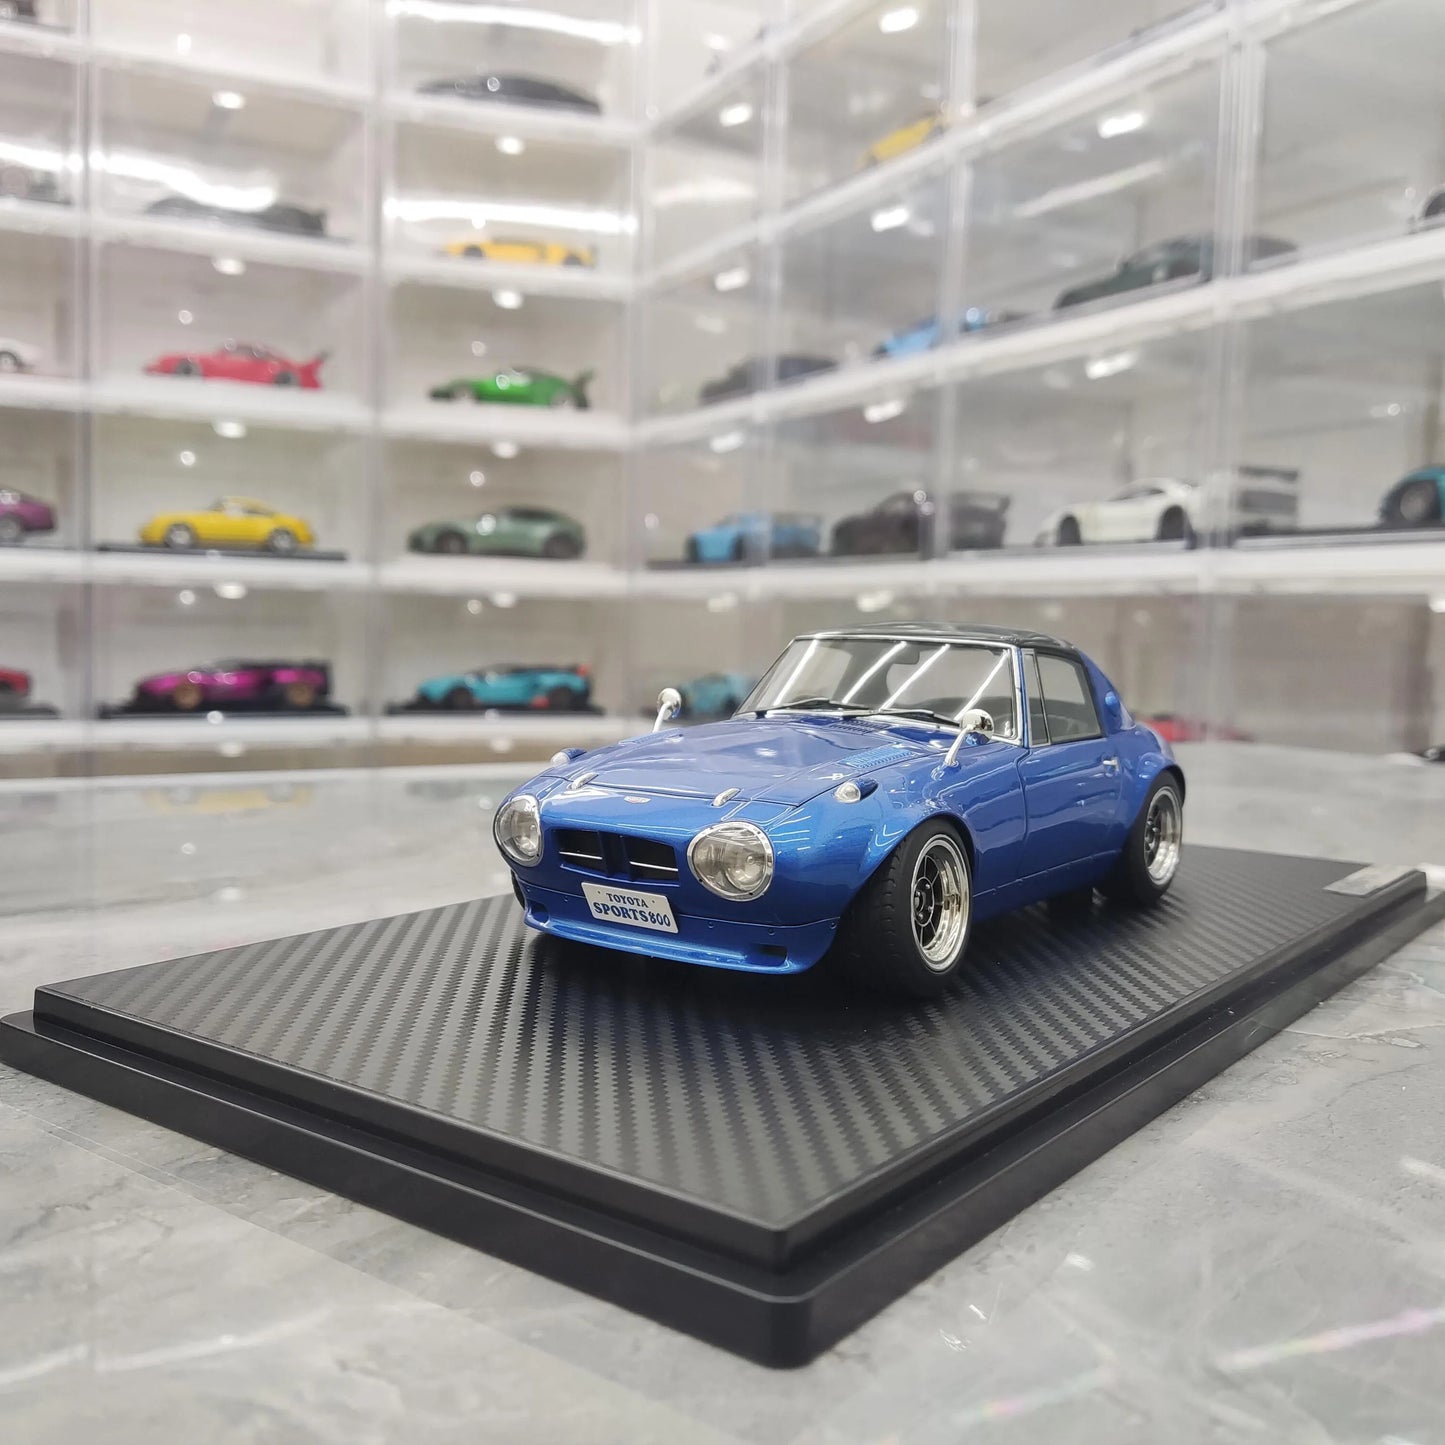 Toyota Sports 800 Classic Car Model Emulation Car Model Collection Decoration 1/18 Scale